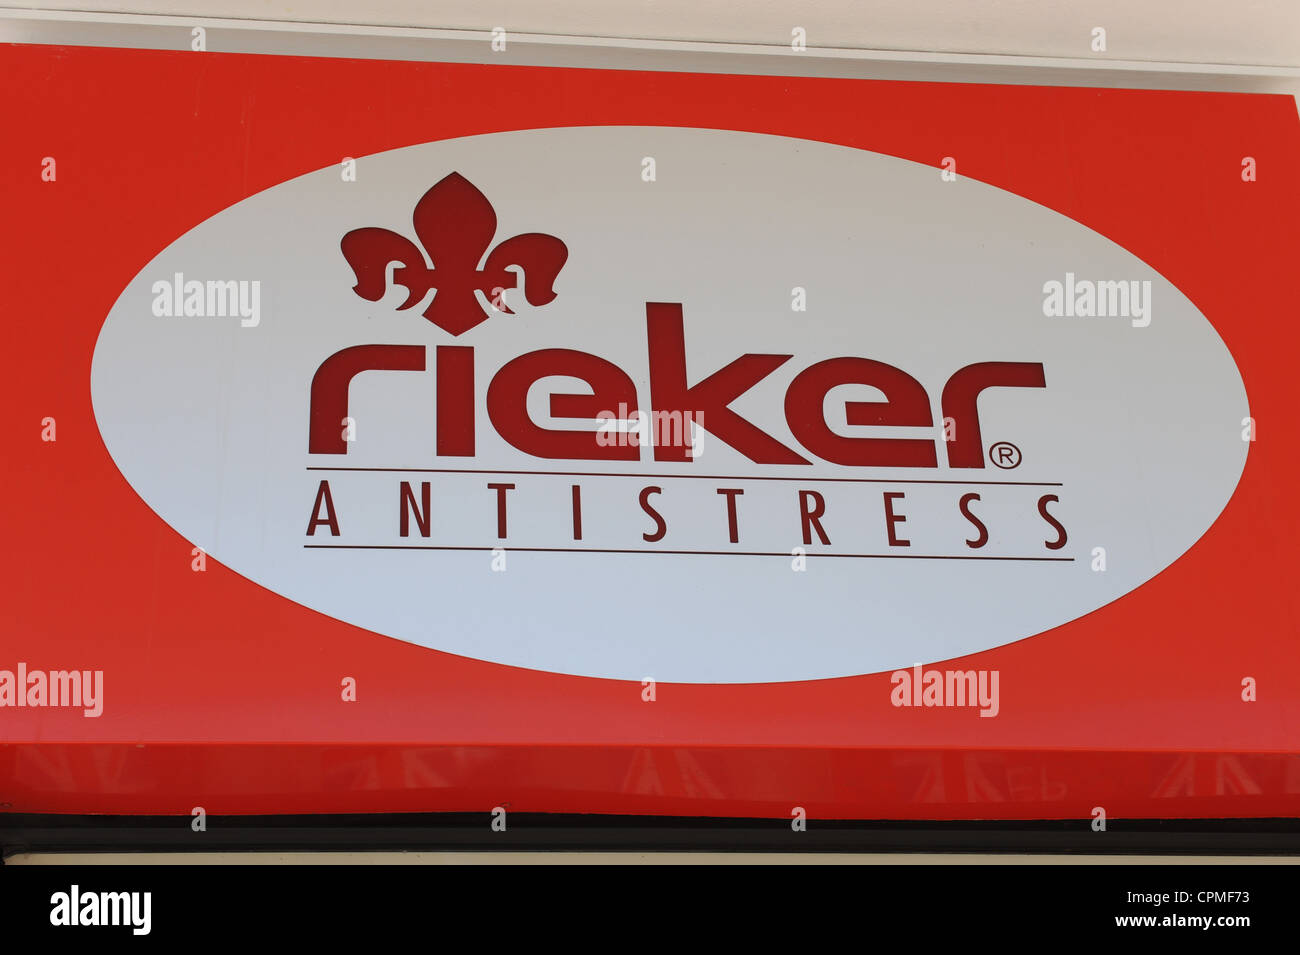 Rieker Sign High Resolution Stock Photography and Images - Alamy